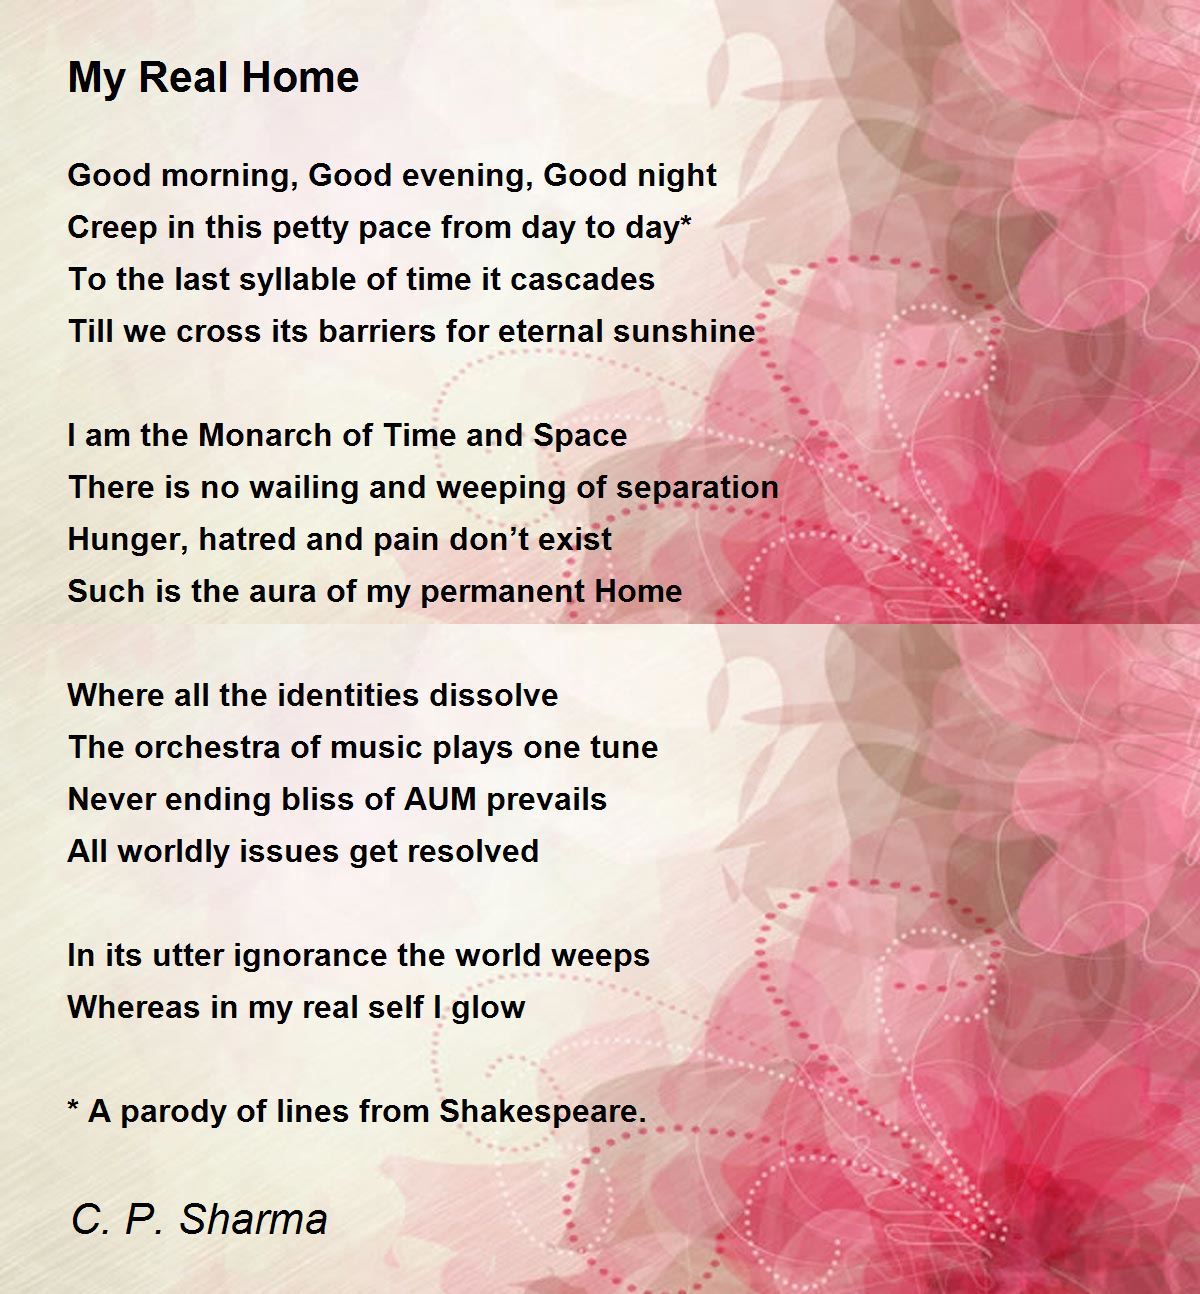 My Real Home - My Real Home Poem by C. P. Sharma